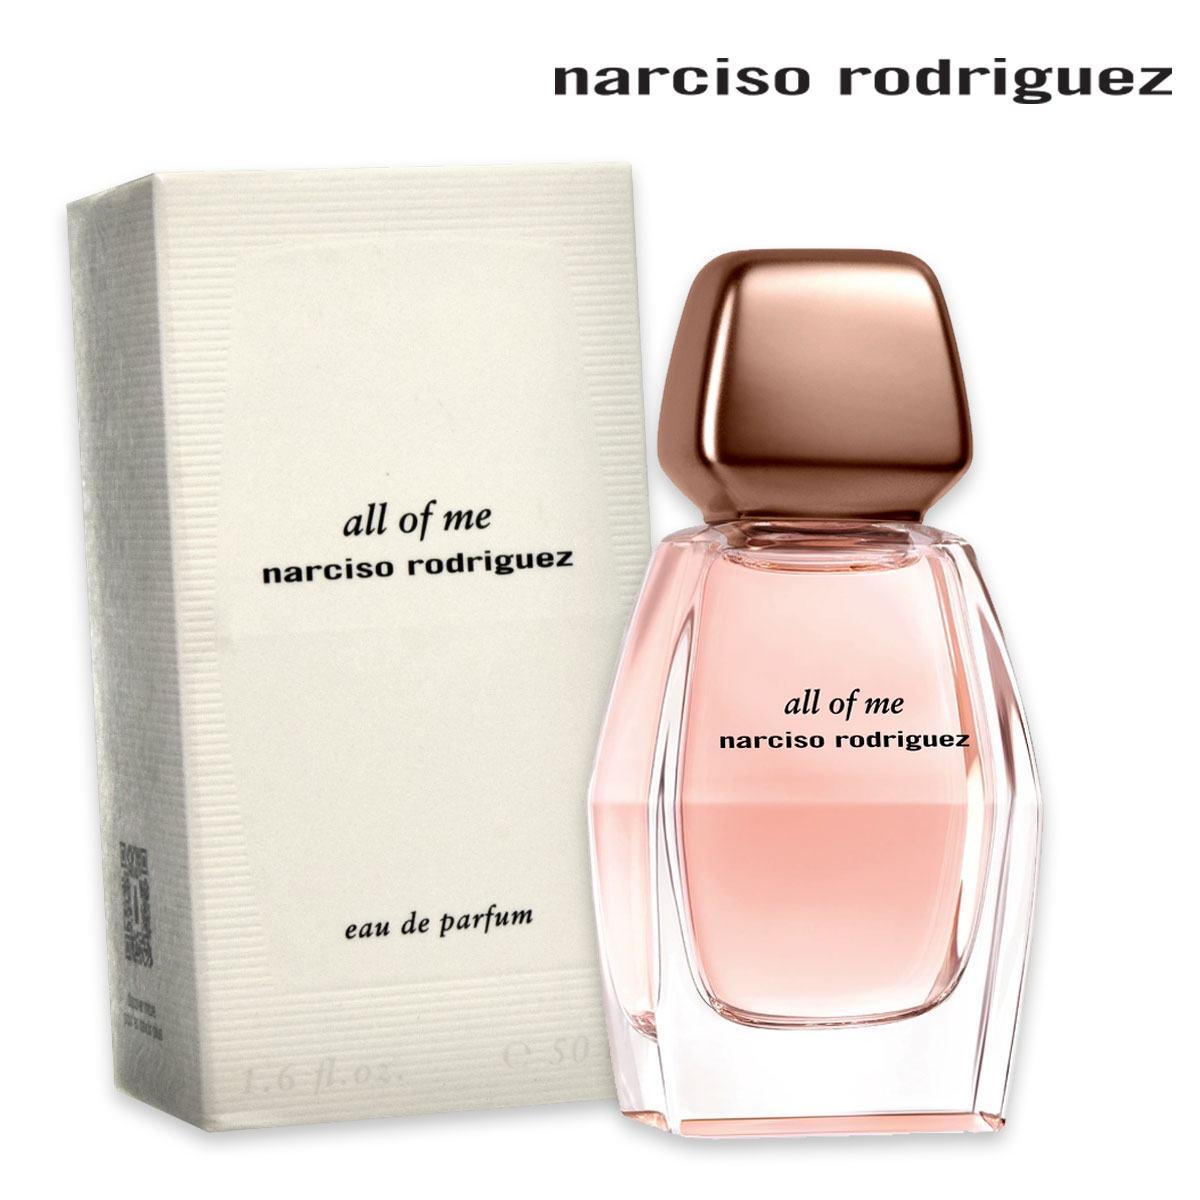 Narciso rodriguez all of me edp 50 ml